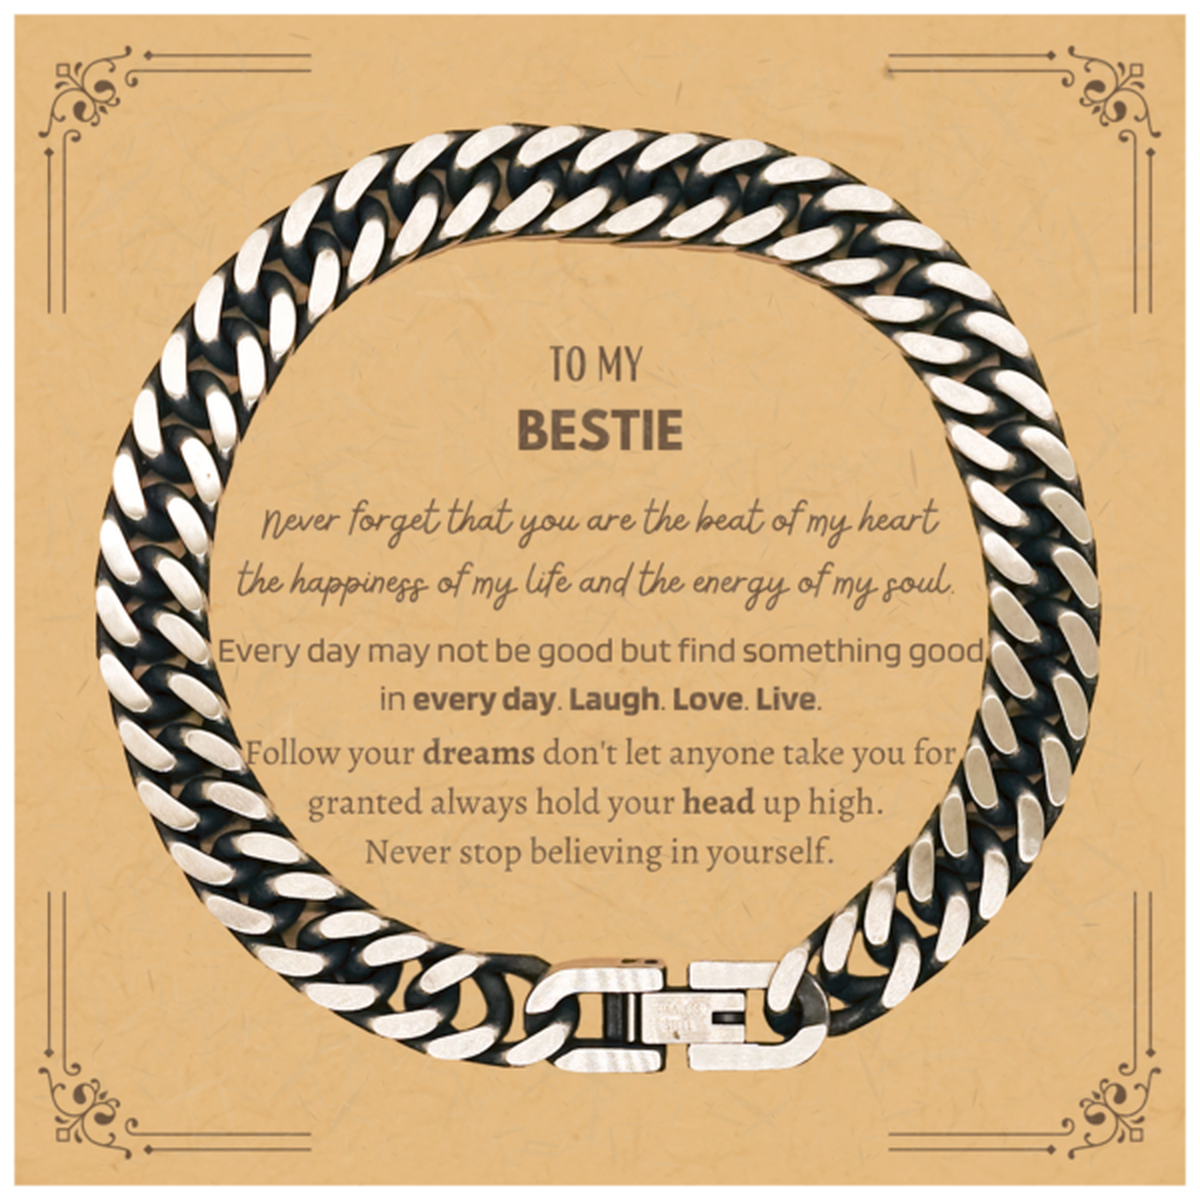 To My Bestie Message Card Gifts, Christmas Bestie Cuban Link Chain Bracelet Present, Birthday Unique Motivational For Bestie, To My Bestie Never forget that you are the beat of my heart the happiness of my life and the energy of my soul